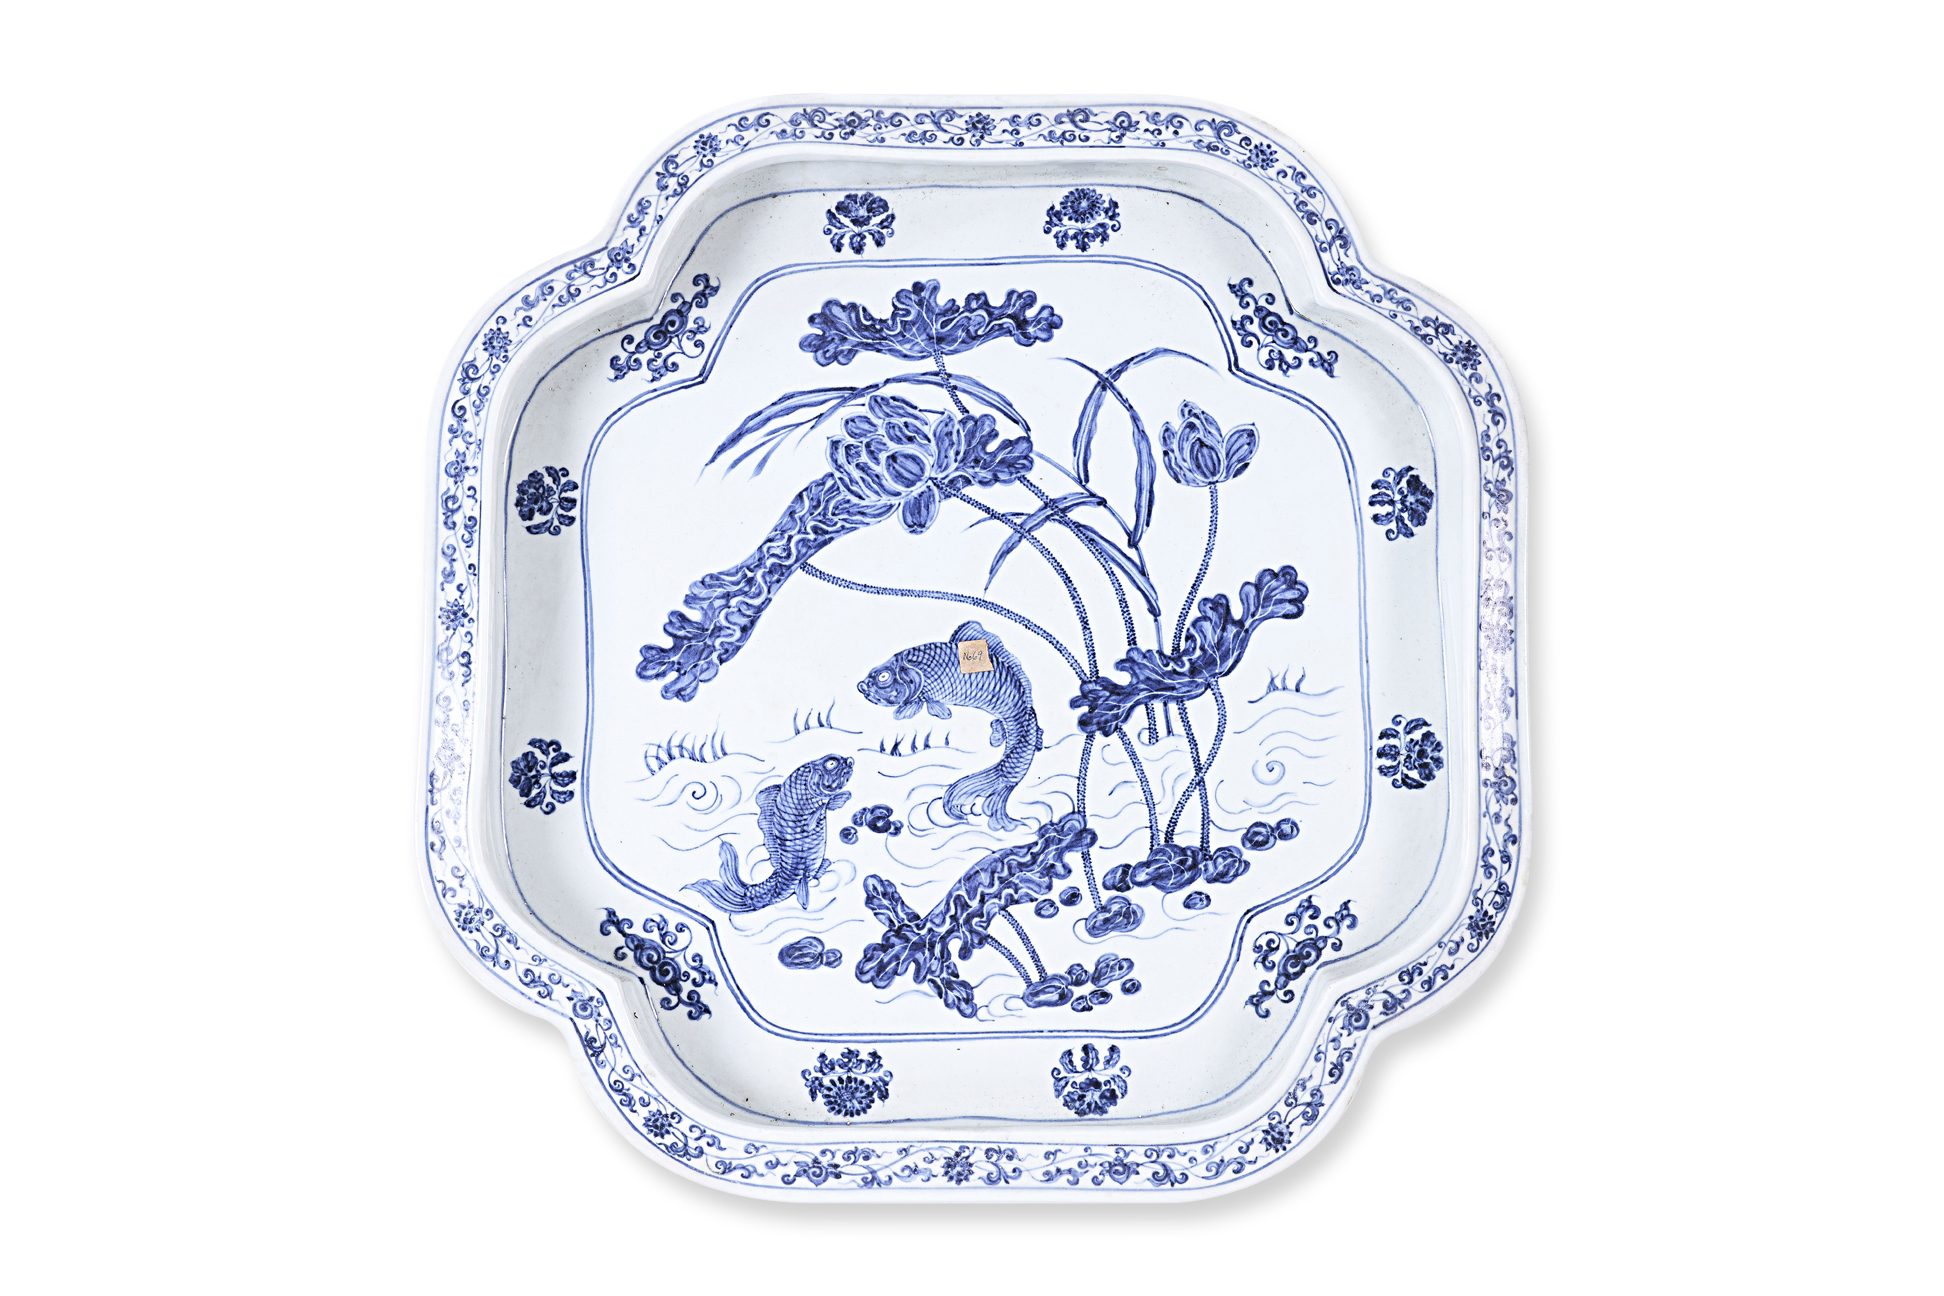 A VERY LARGE BLUE AND WHITE PORCELAIN LOTUS POND DISH